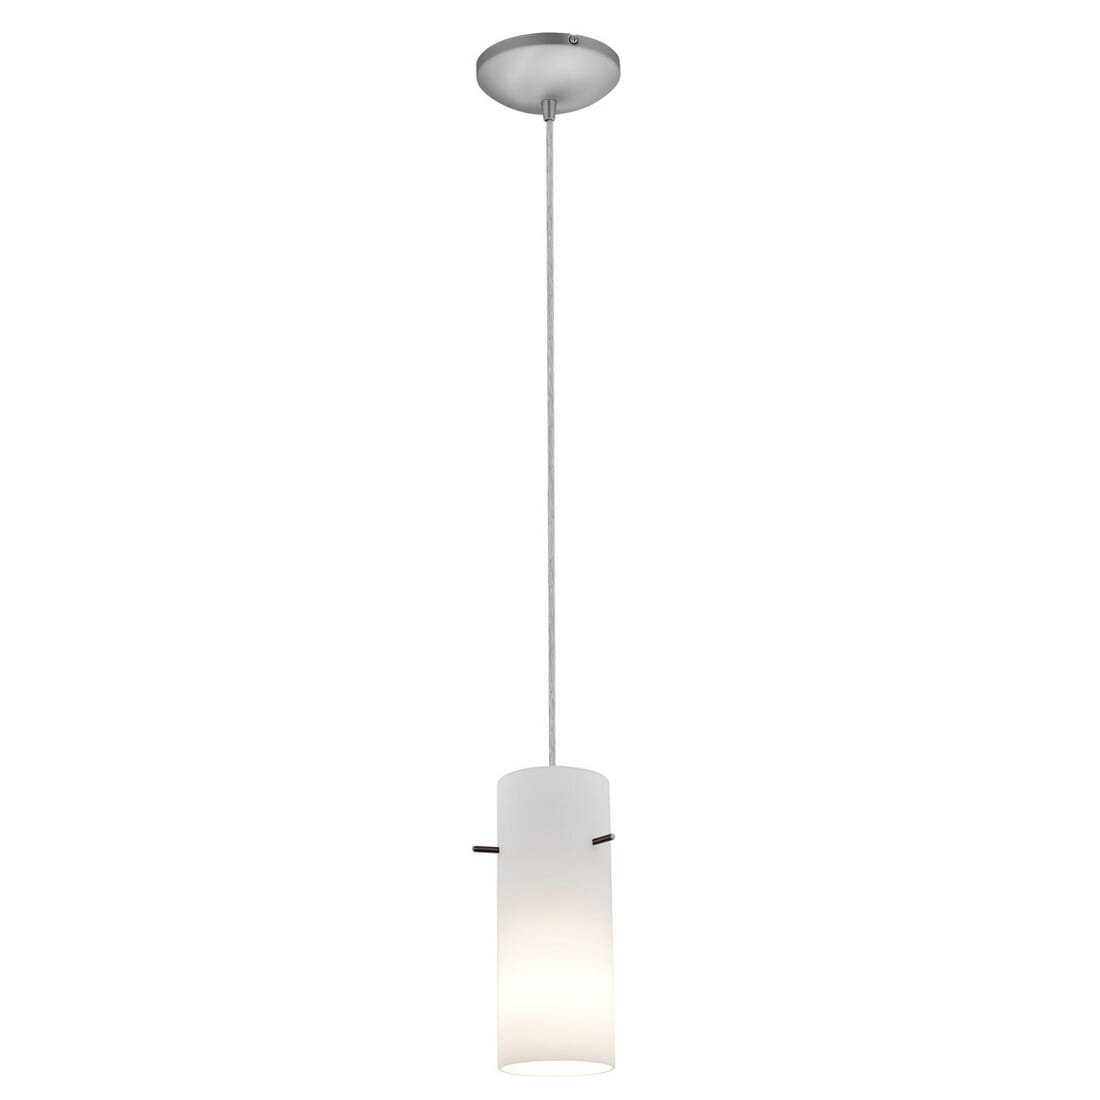 Access Cylinder Pendant Light in Brushed Steel -  Access Lighting, 28030-1C-BS/OPL